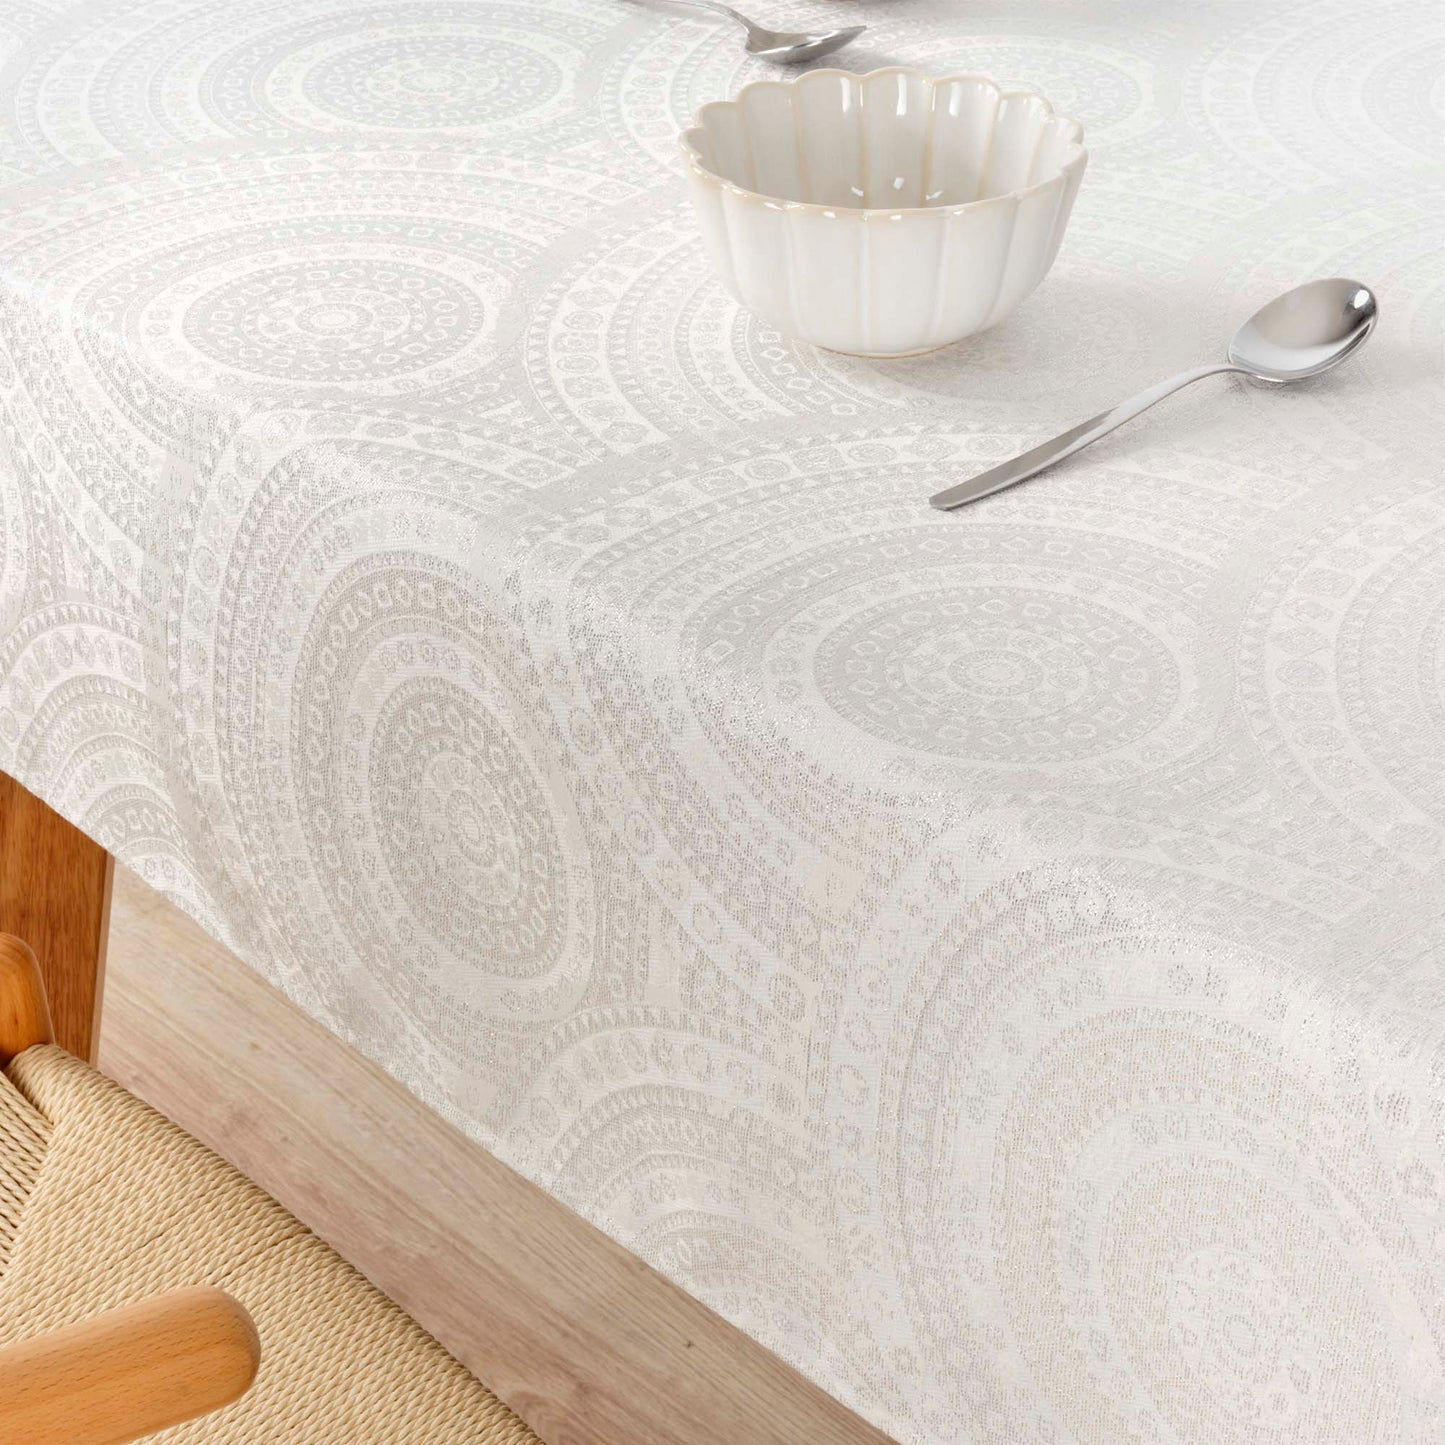 Jacquard fabric touch tablecloth R17676 Natural Silver Lurex